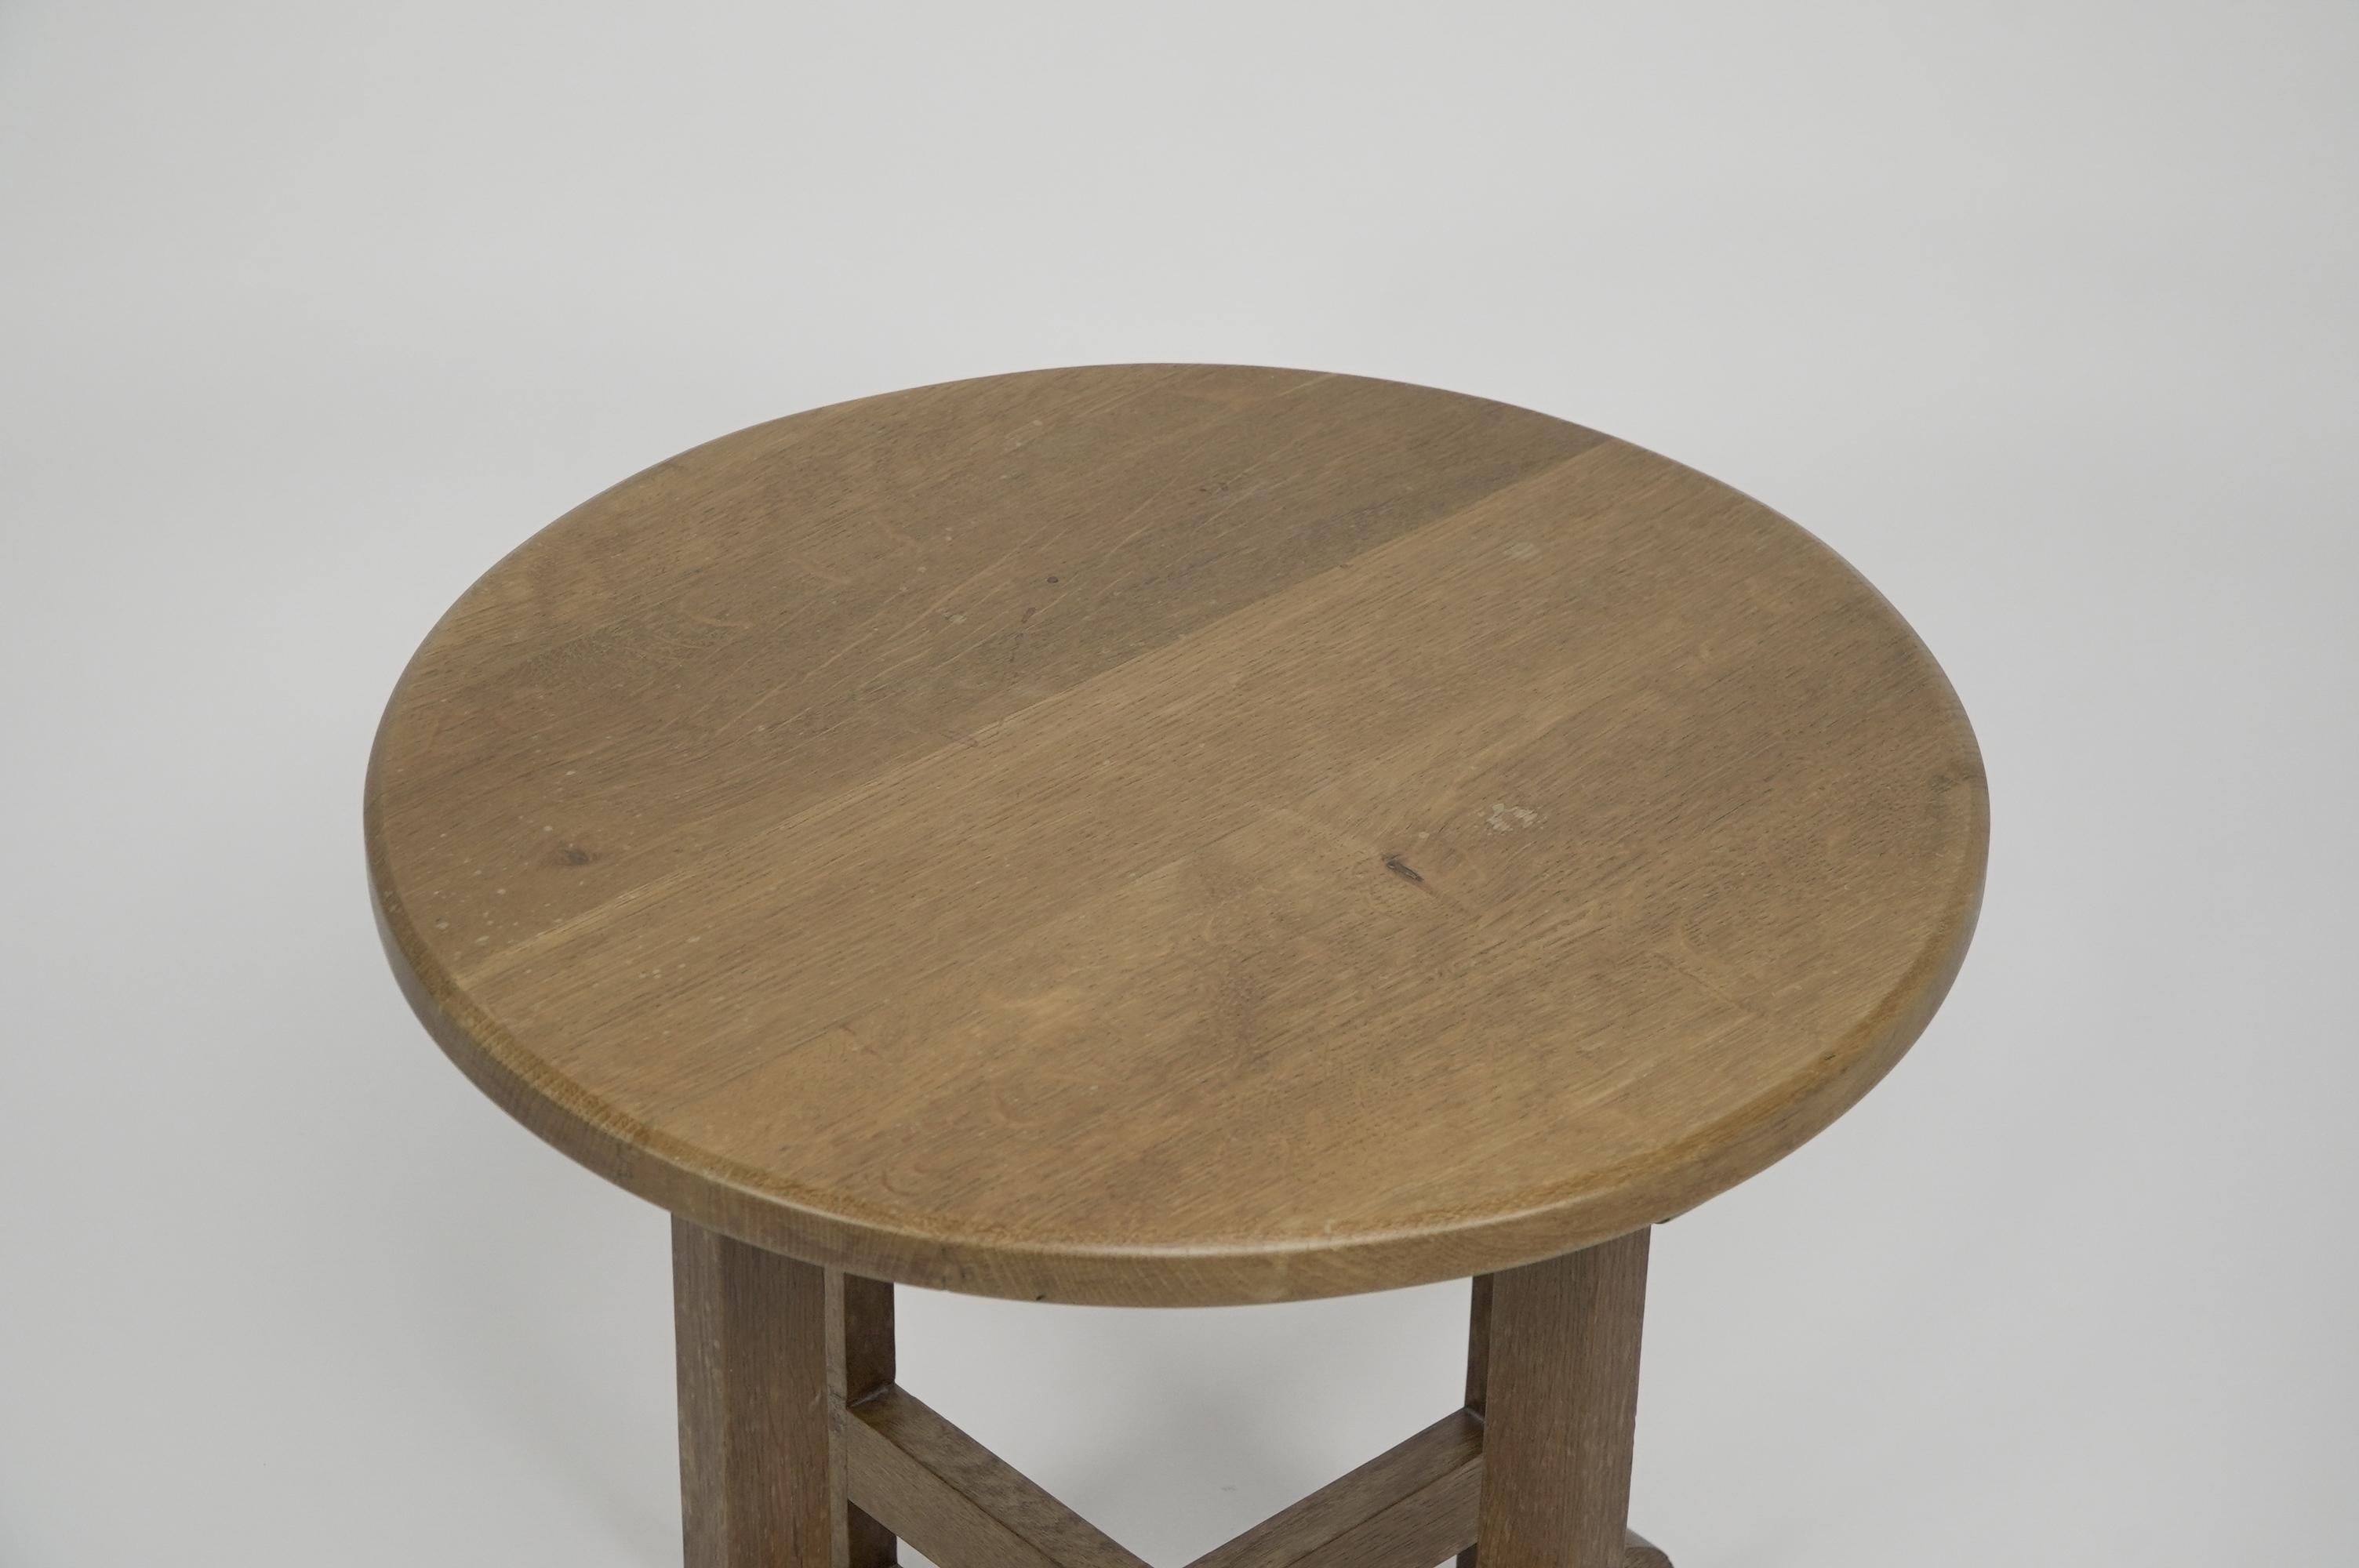 English Heals of London in the style of. An oak circular oak side or occasional table. For Sale